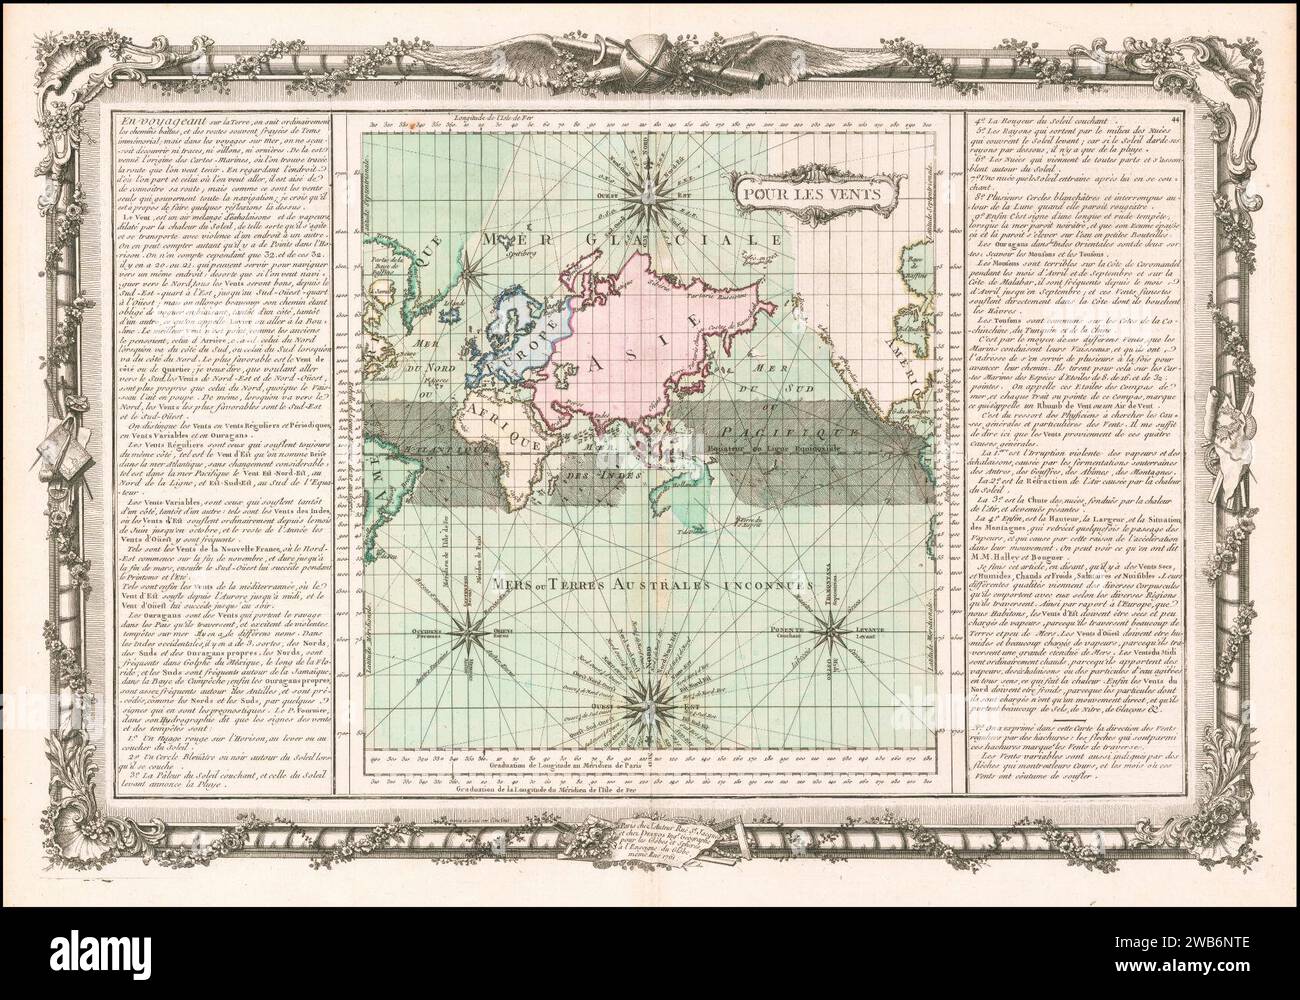 1756 map of the world by Buy de Mornas. Stock Photo